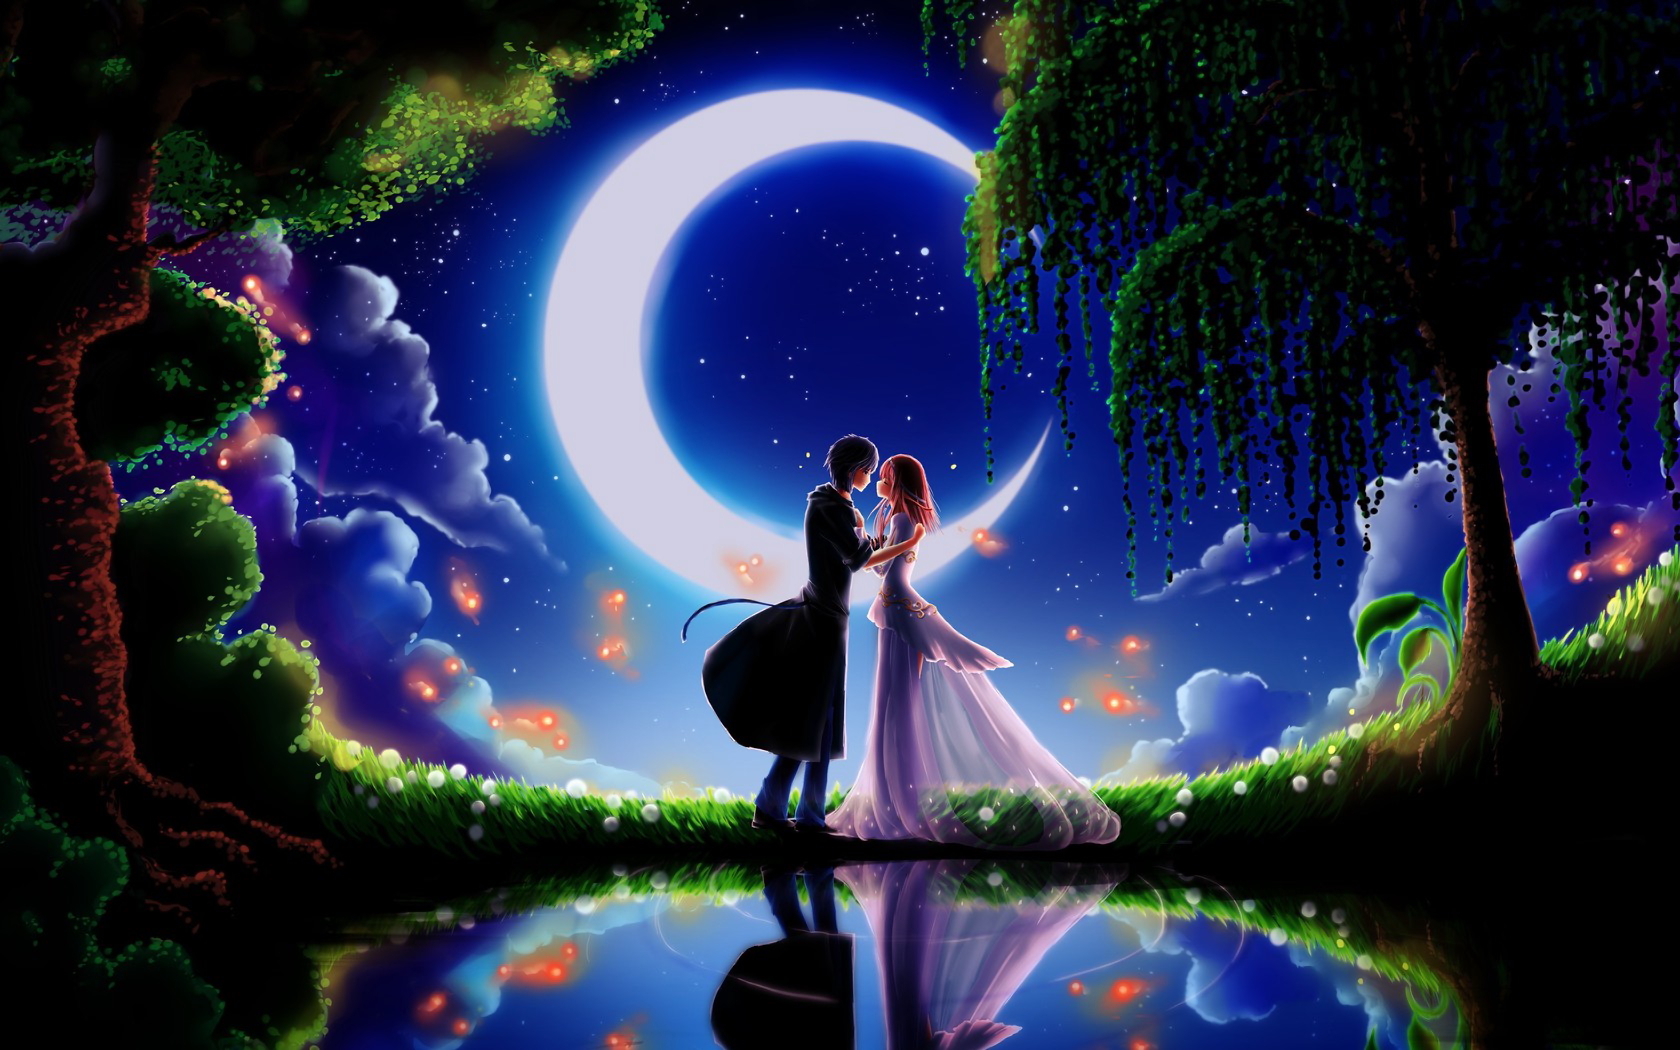 Lovers Image Wallpaper On